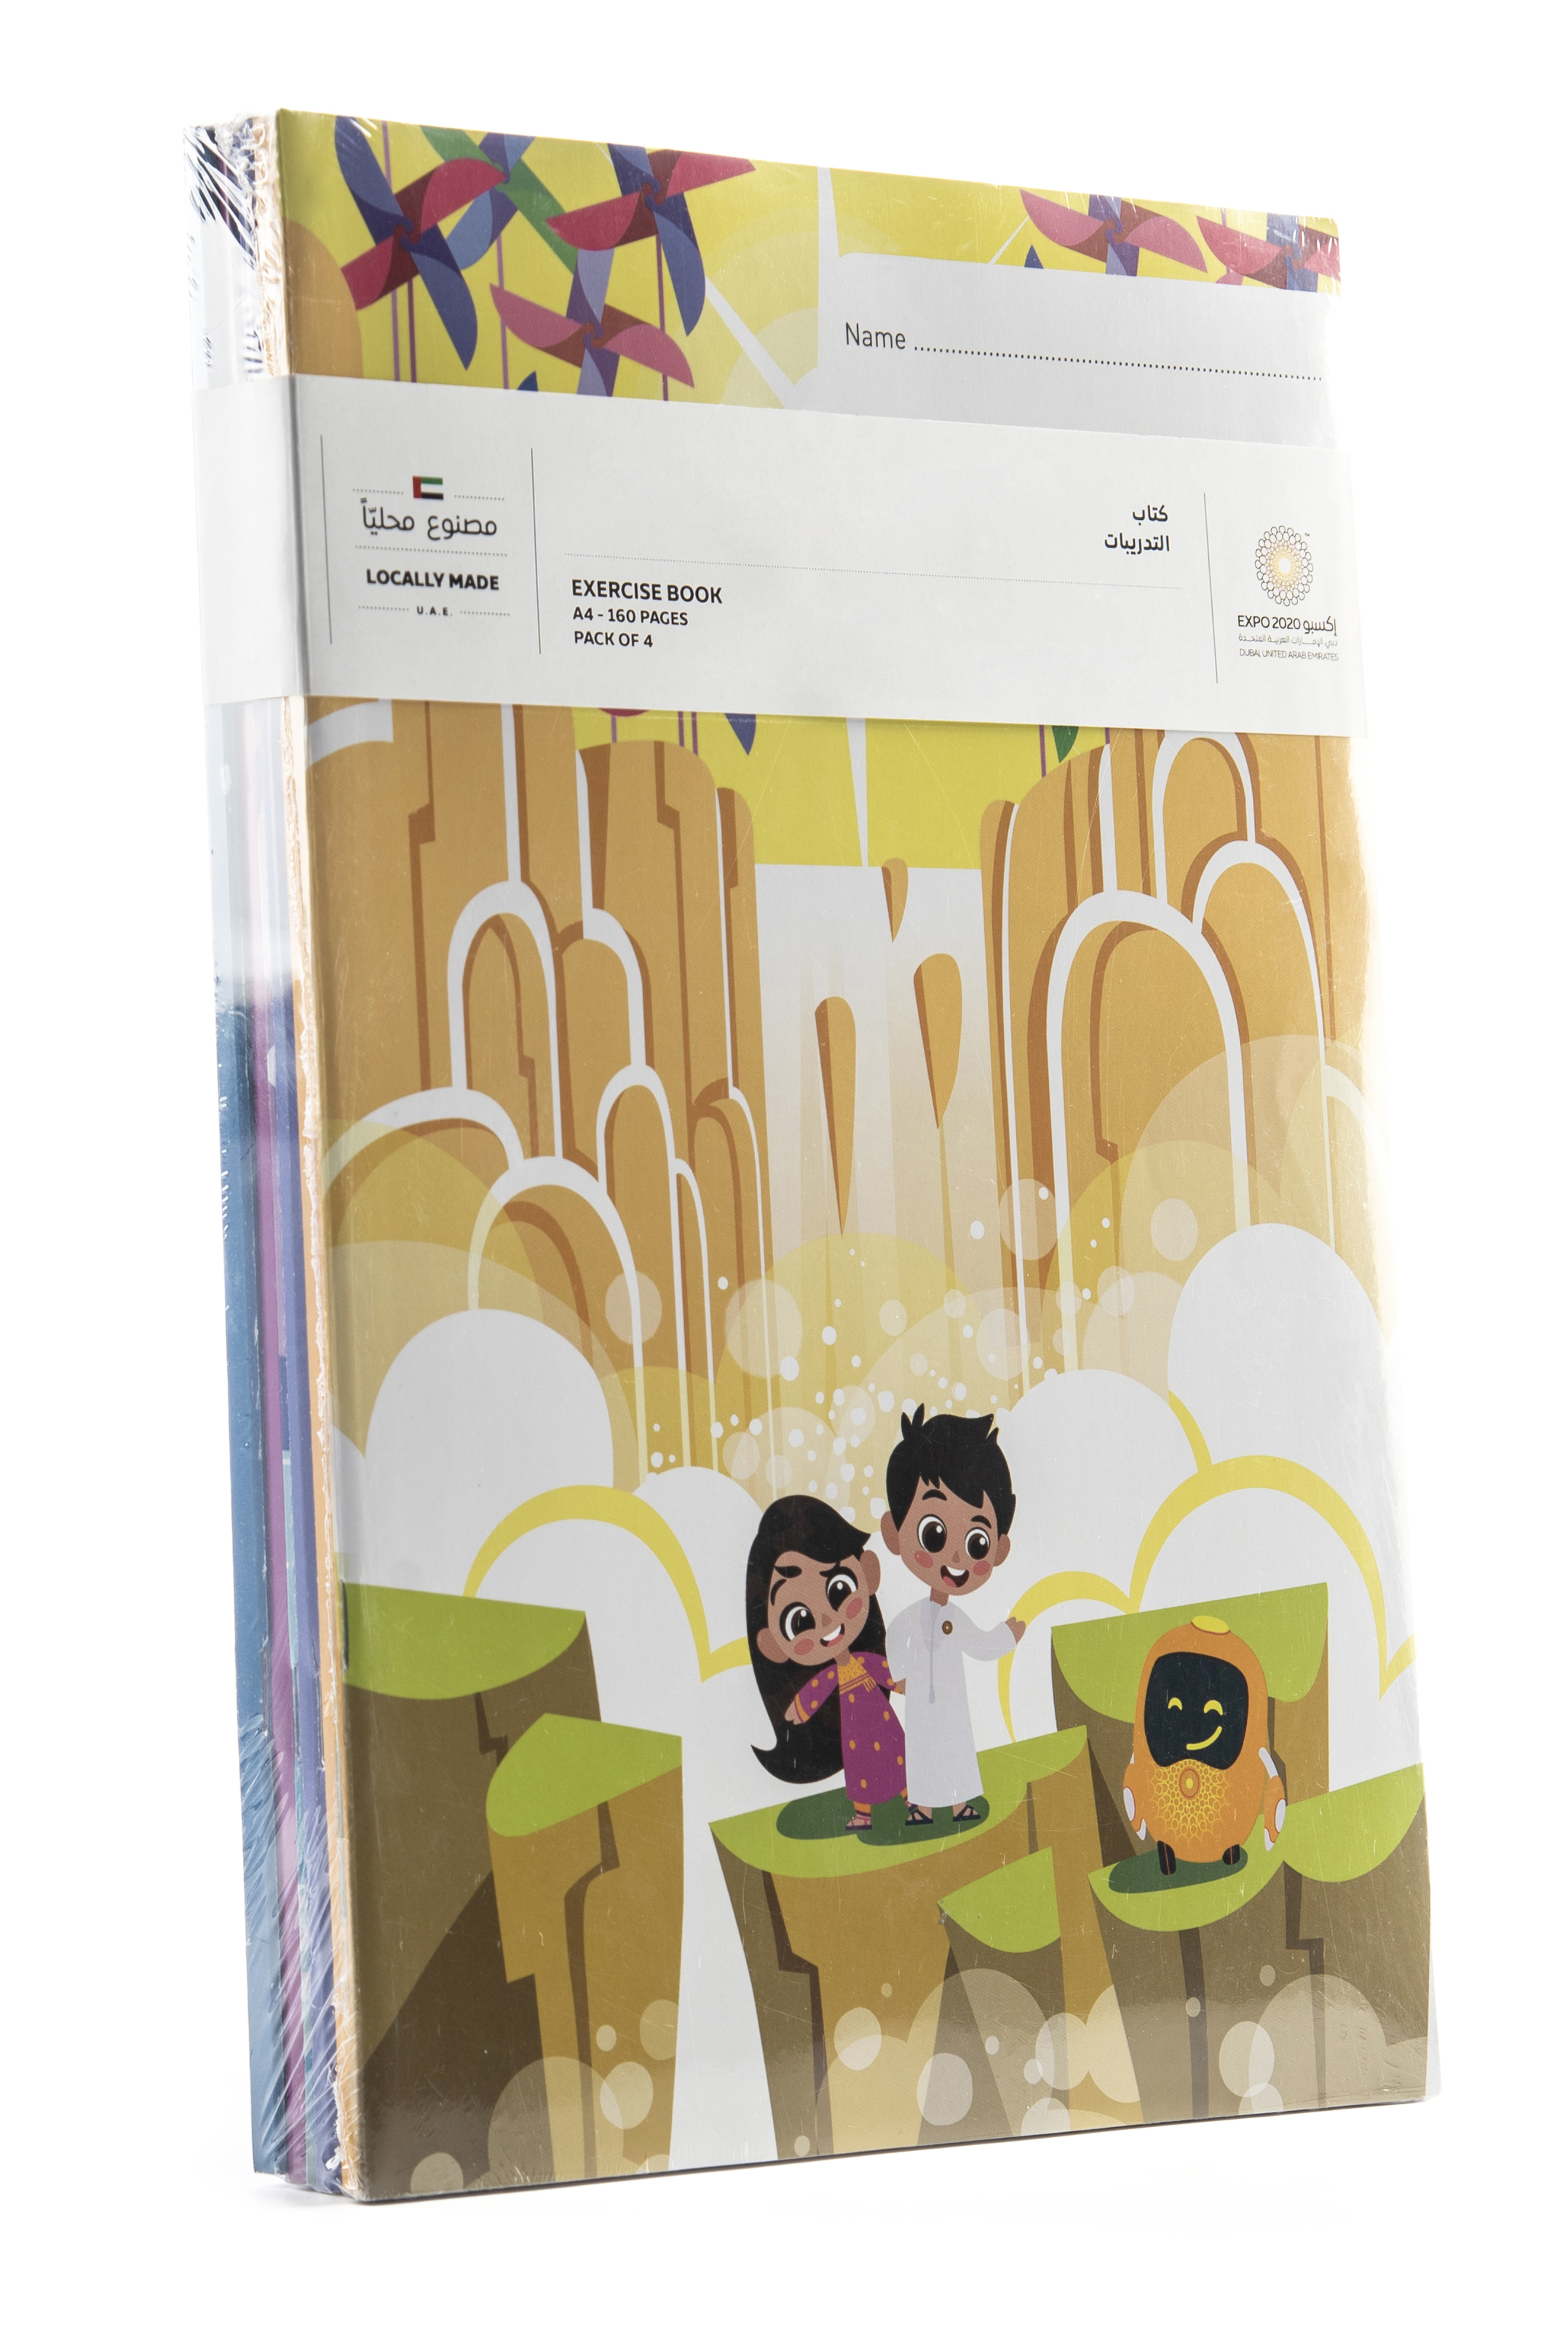 Expo 2020 Dubai Mascots On a Mission A4 Exercise Books Pack of 4 - 160 Pages